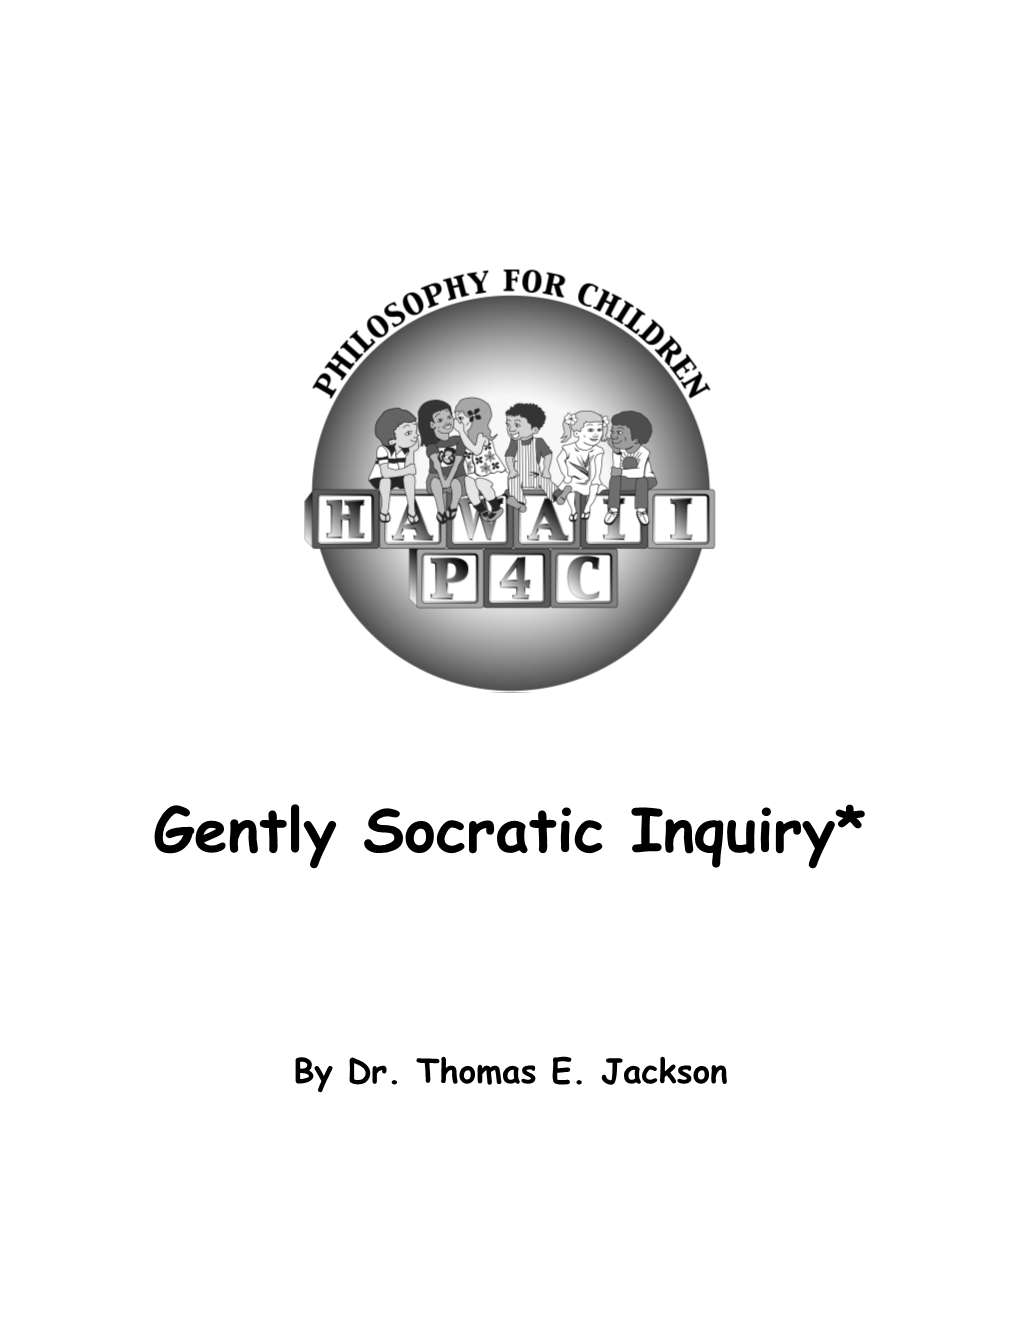 Gently Socratic Inquiry Recognizes That a Paramount Objective of Education Is to Help